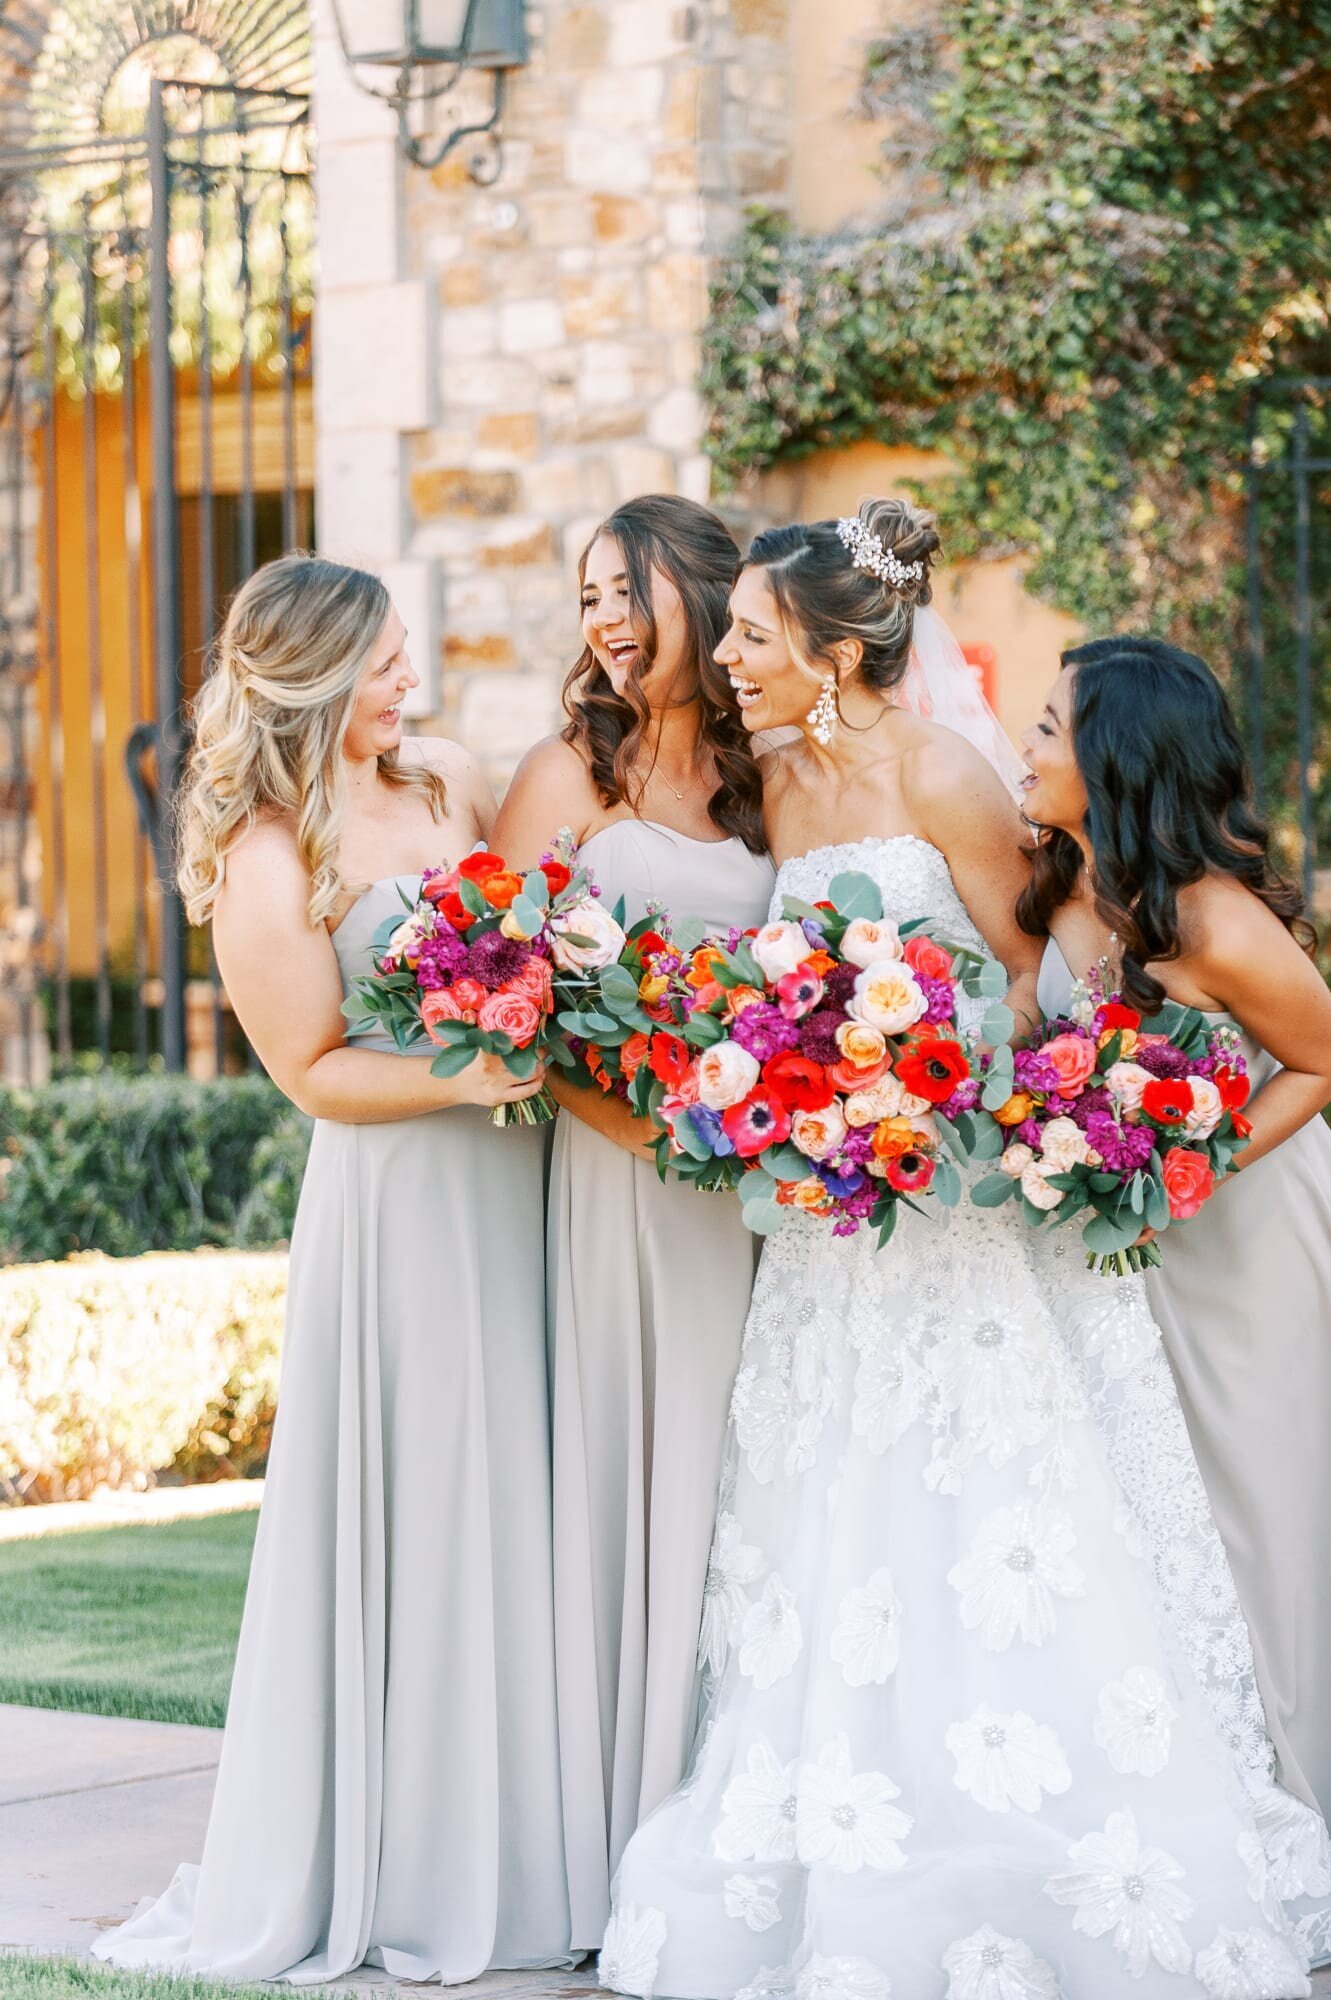 The Bride and her bridesmaids laugh during portraits.